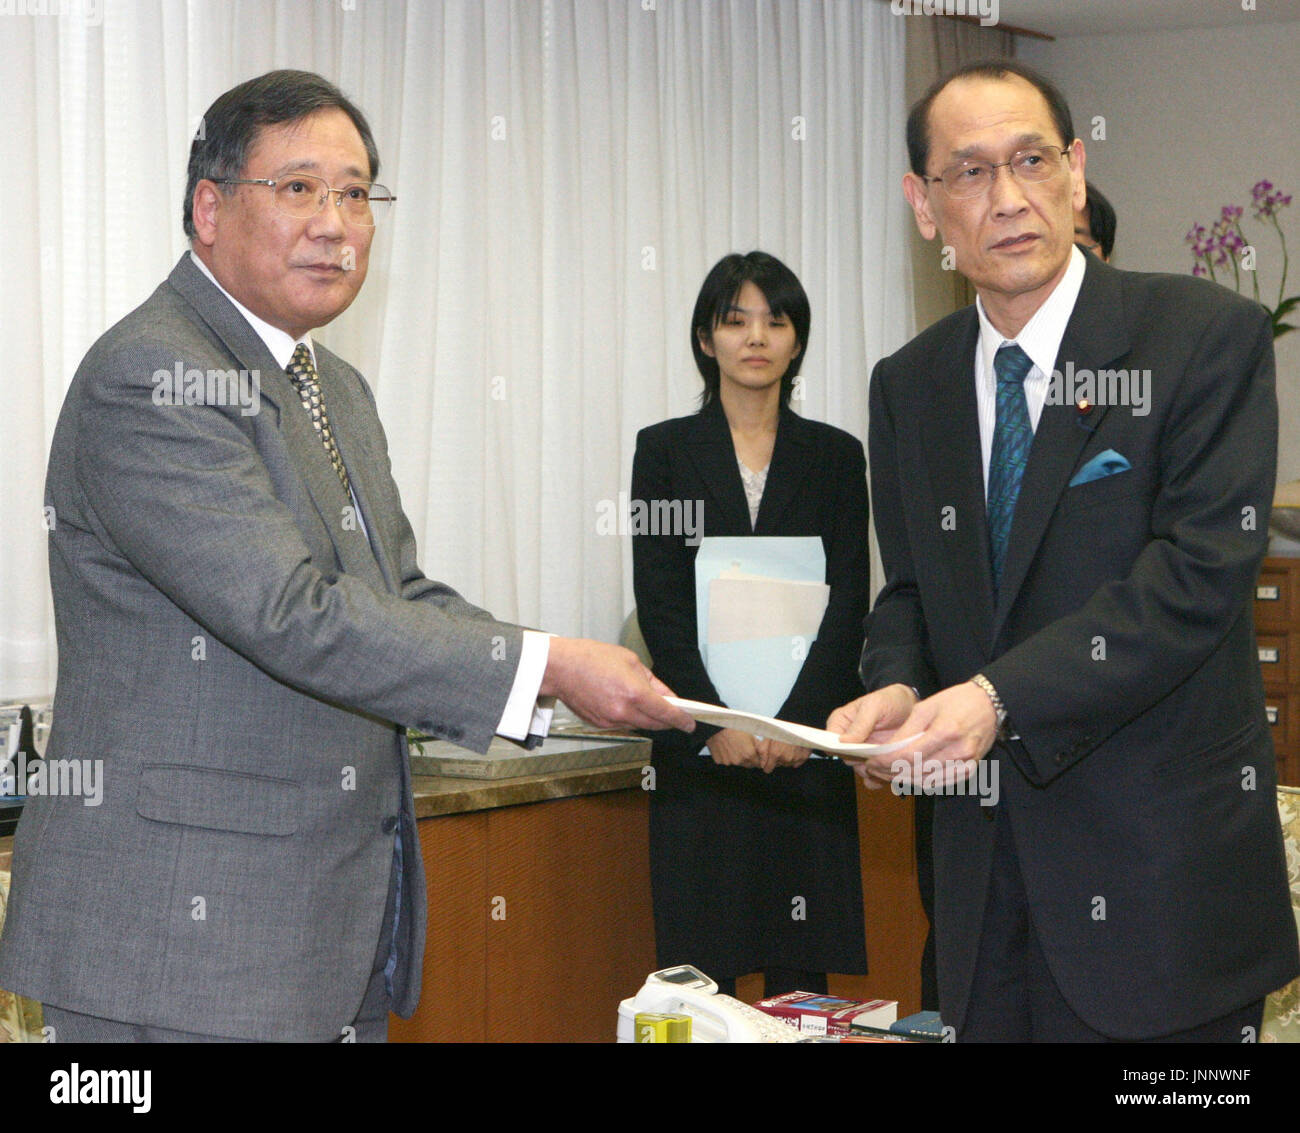 TOKYO, Japan - Takehiko Sugiyama (L), head of the Textbook Authorization Council, hands a report to education minister Kisaburo Tokai (R) on Dec. 26 in which the council approved requests by textbook publishers to reinstate references to the Japanese military's role in forcing civilians to commit mass suicides during the 1945 Battle of Okinawa. (Kyodo) Stock Photo